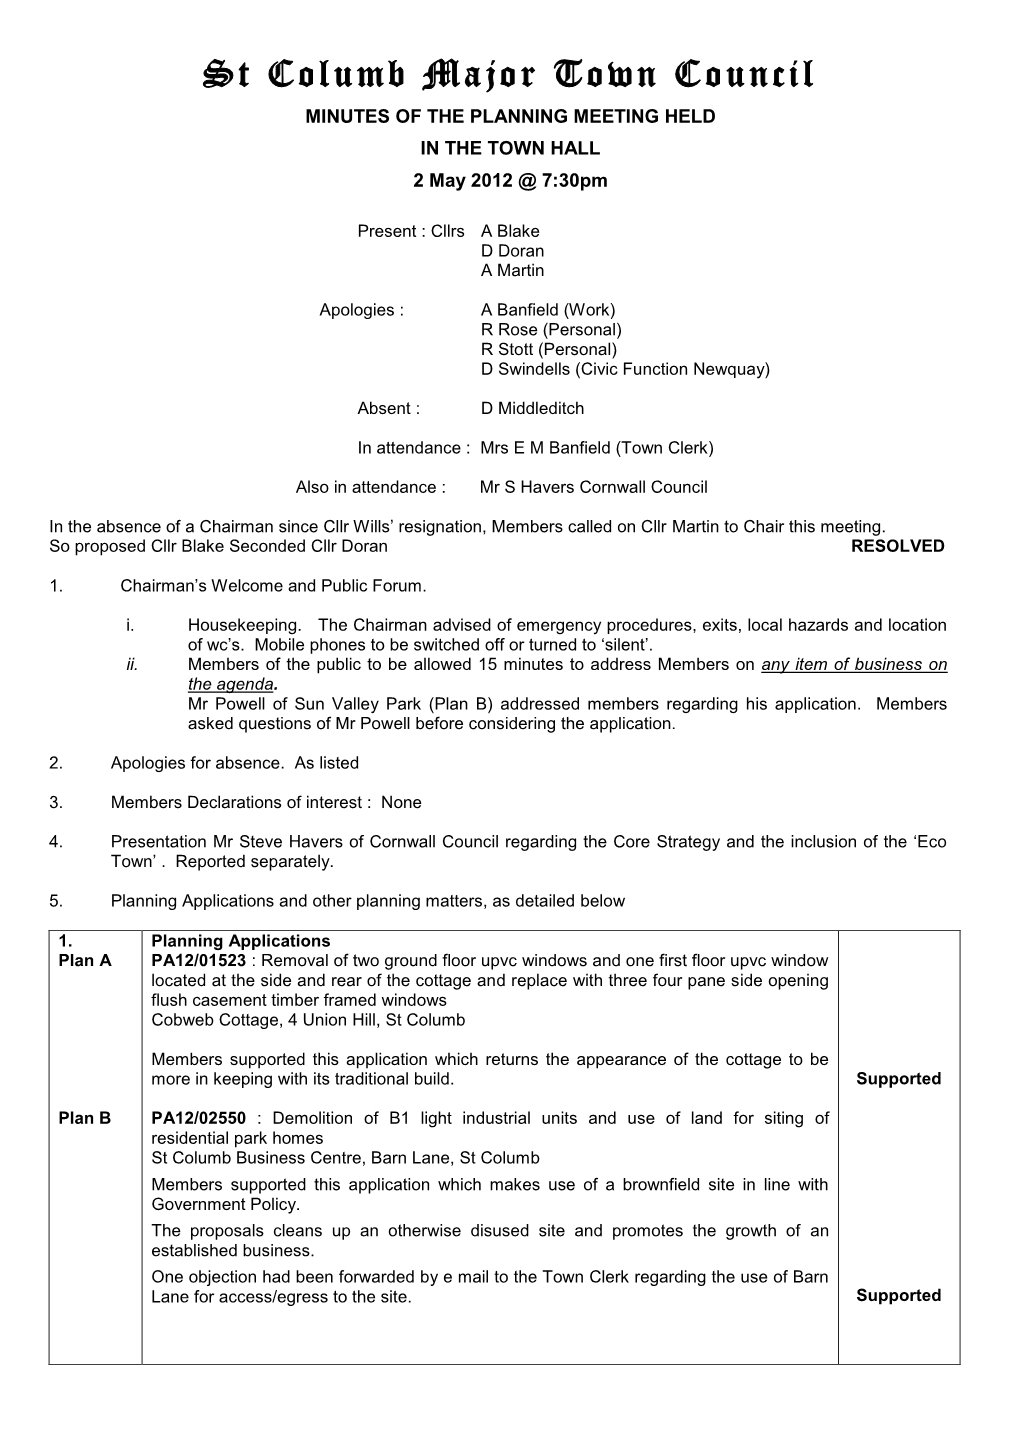 St Columb Major Town Council MINUTES of the PLANNING MEETING HELD in the TOWN HALL 2 May 2012 @ 7:30Pm